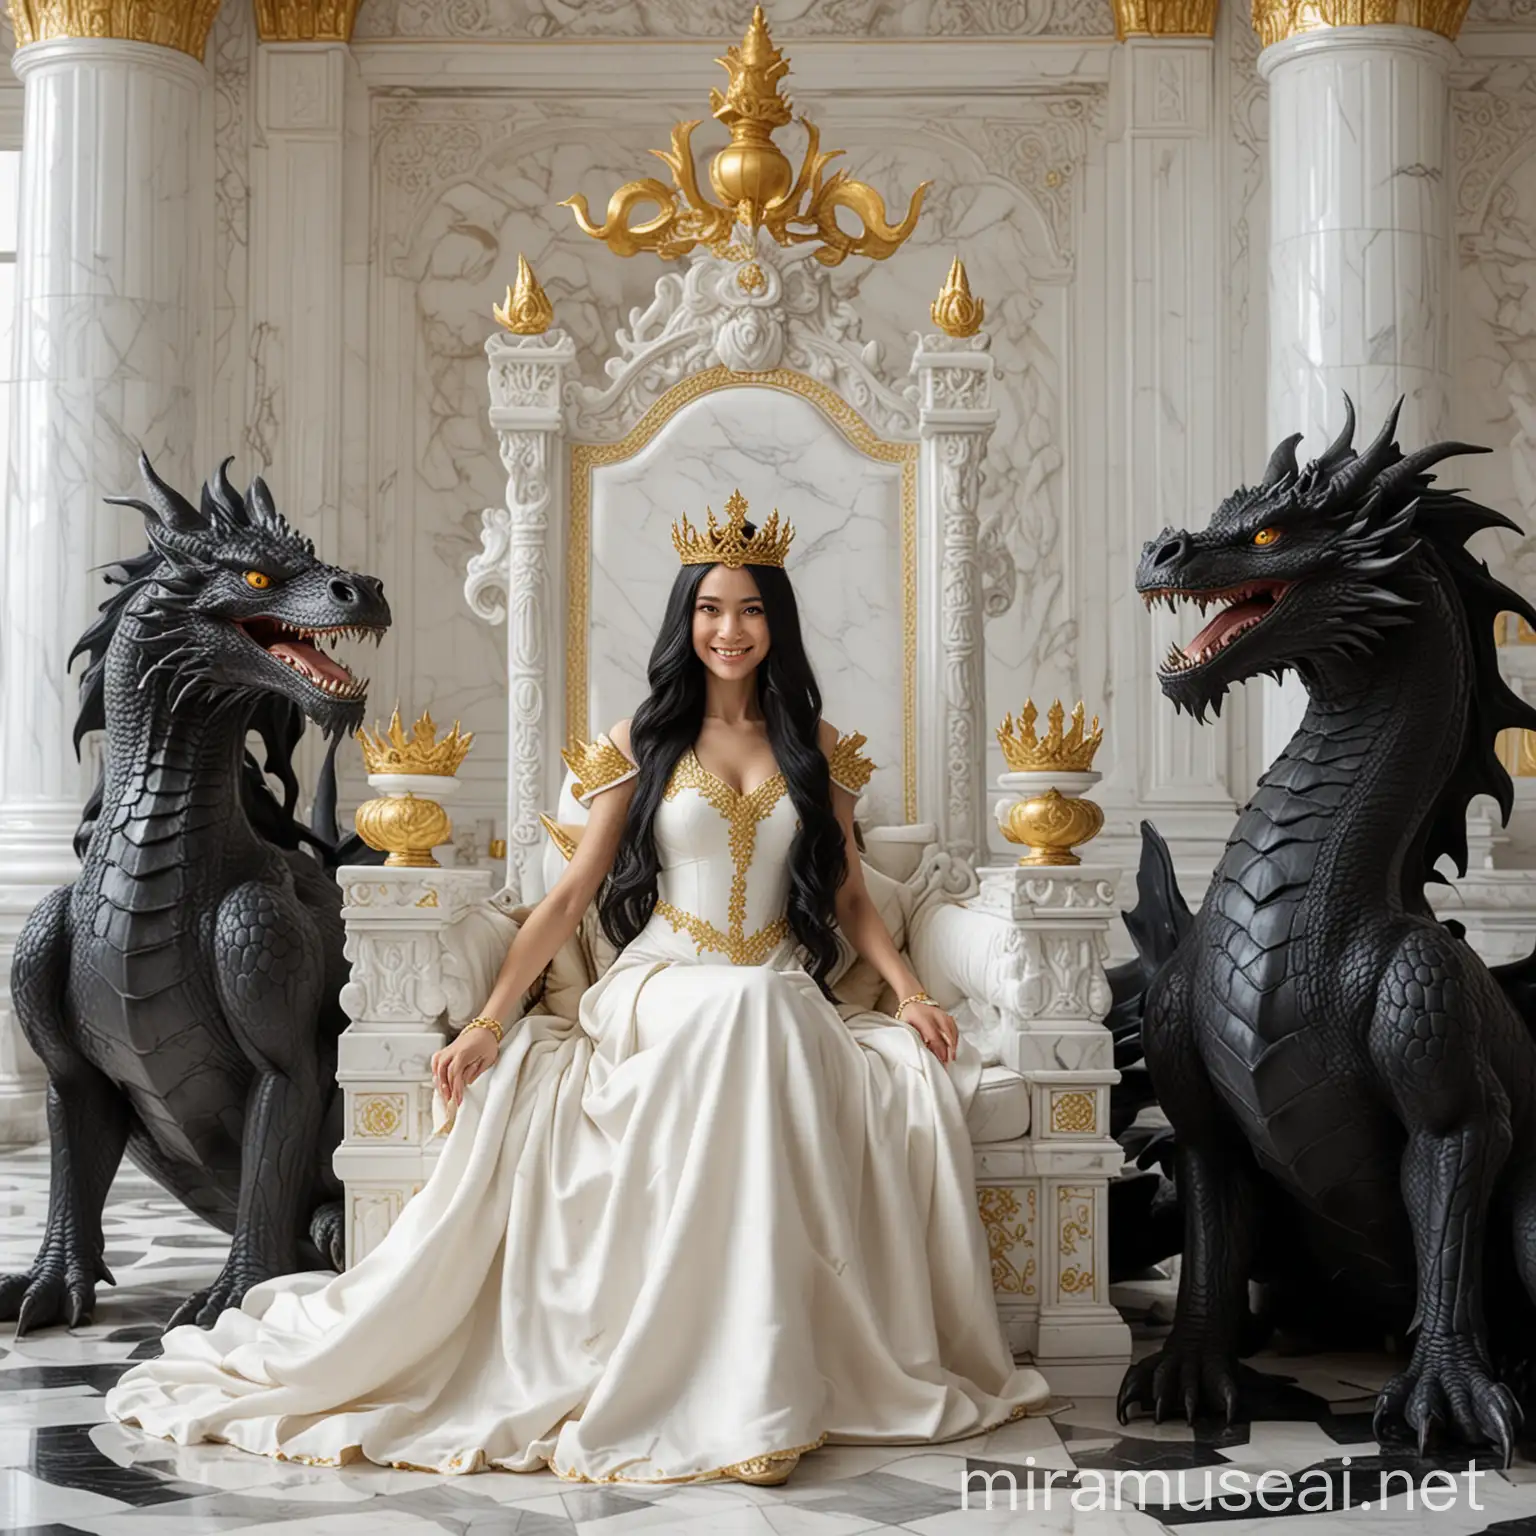 one  smiley queen with a golden dress and a white crown on her head,black long hair, sitting on her throne and guarded by two large black real dragons, located in an all-white palace made of marble.